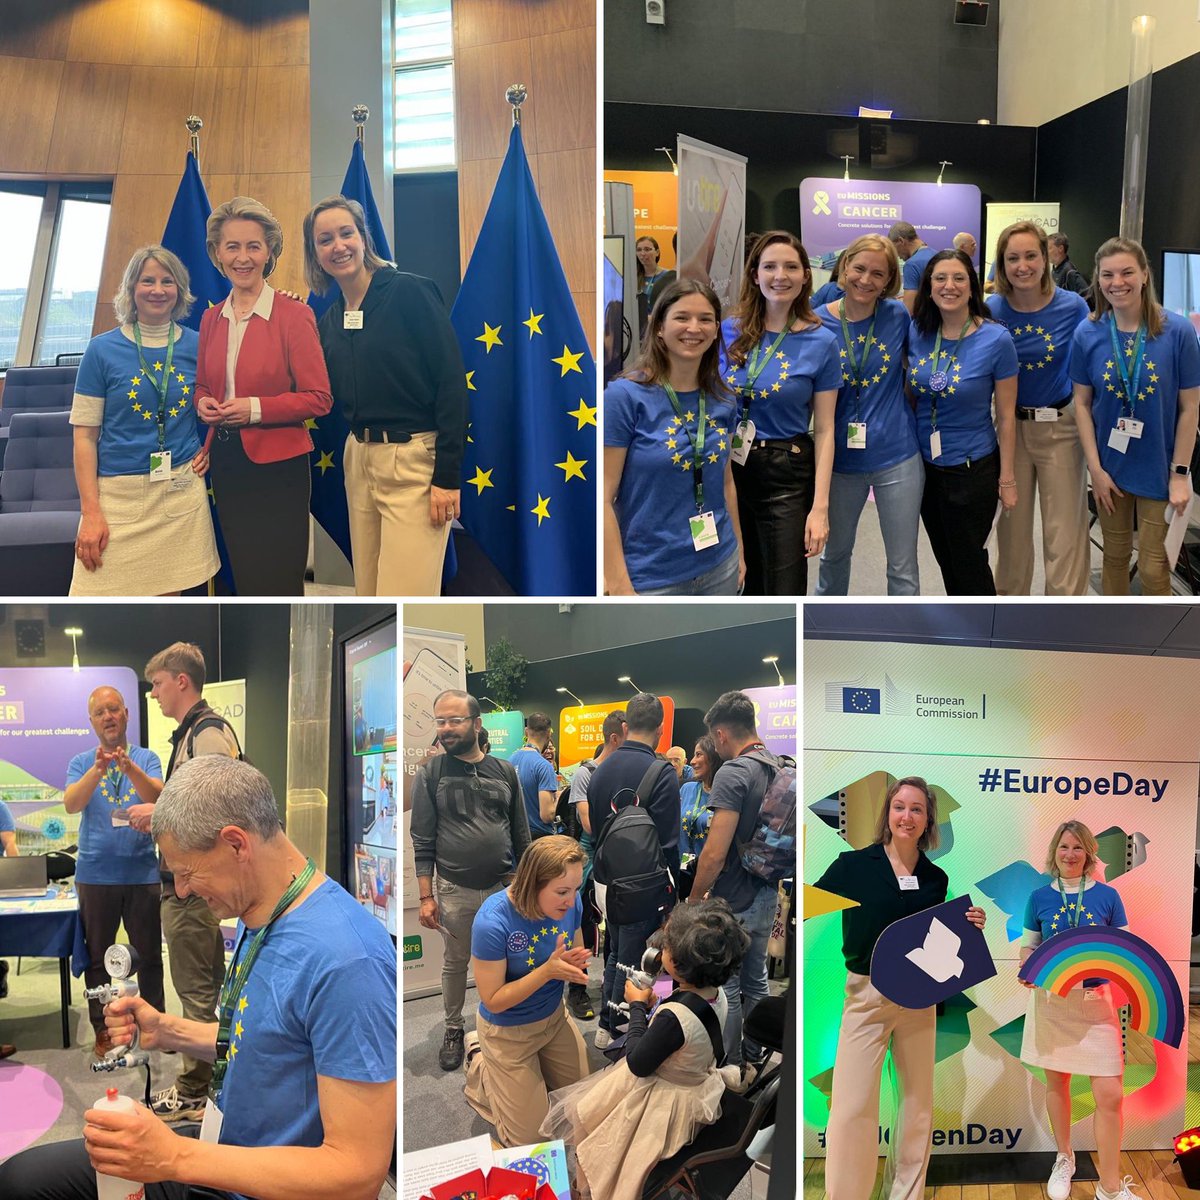 The PREFERABLE II project was showcased during the #EUOpenDay! We informed many visitors about the project and measured their handgrip strength, which we often do with pts in our exercise-oncology trials to evaluate exercise effects. #EUCancerMission #EUHealthResearch @EU_HaDEA